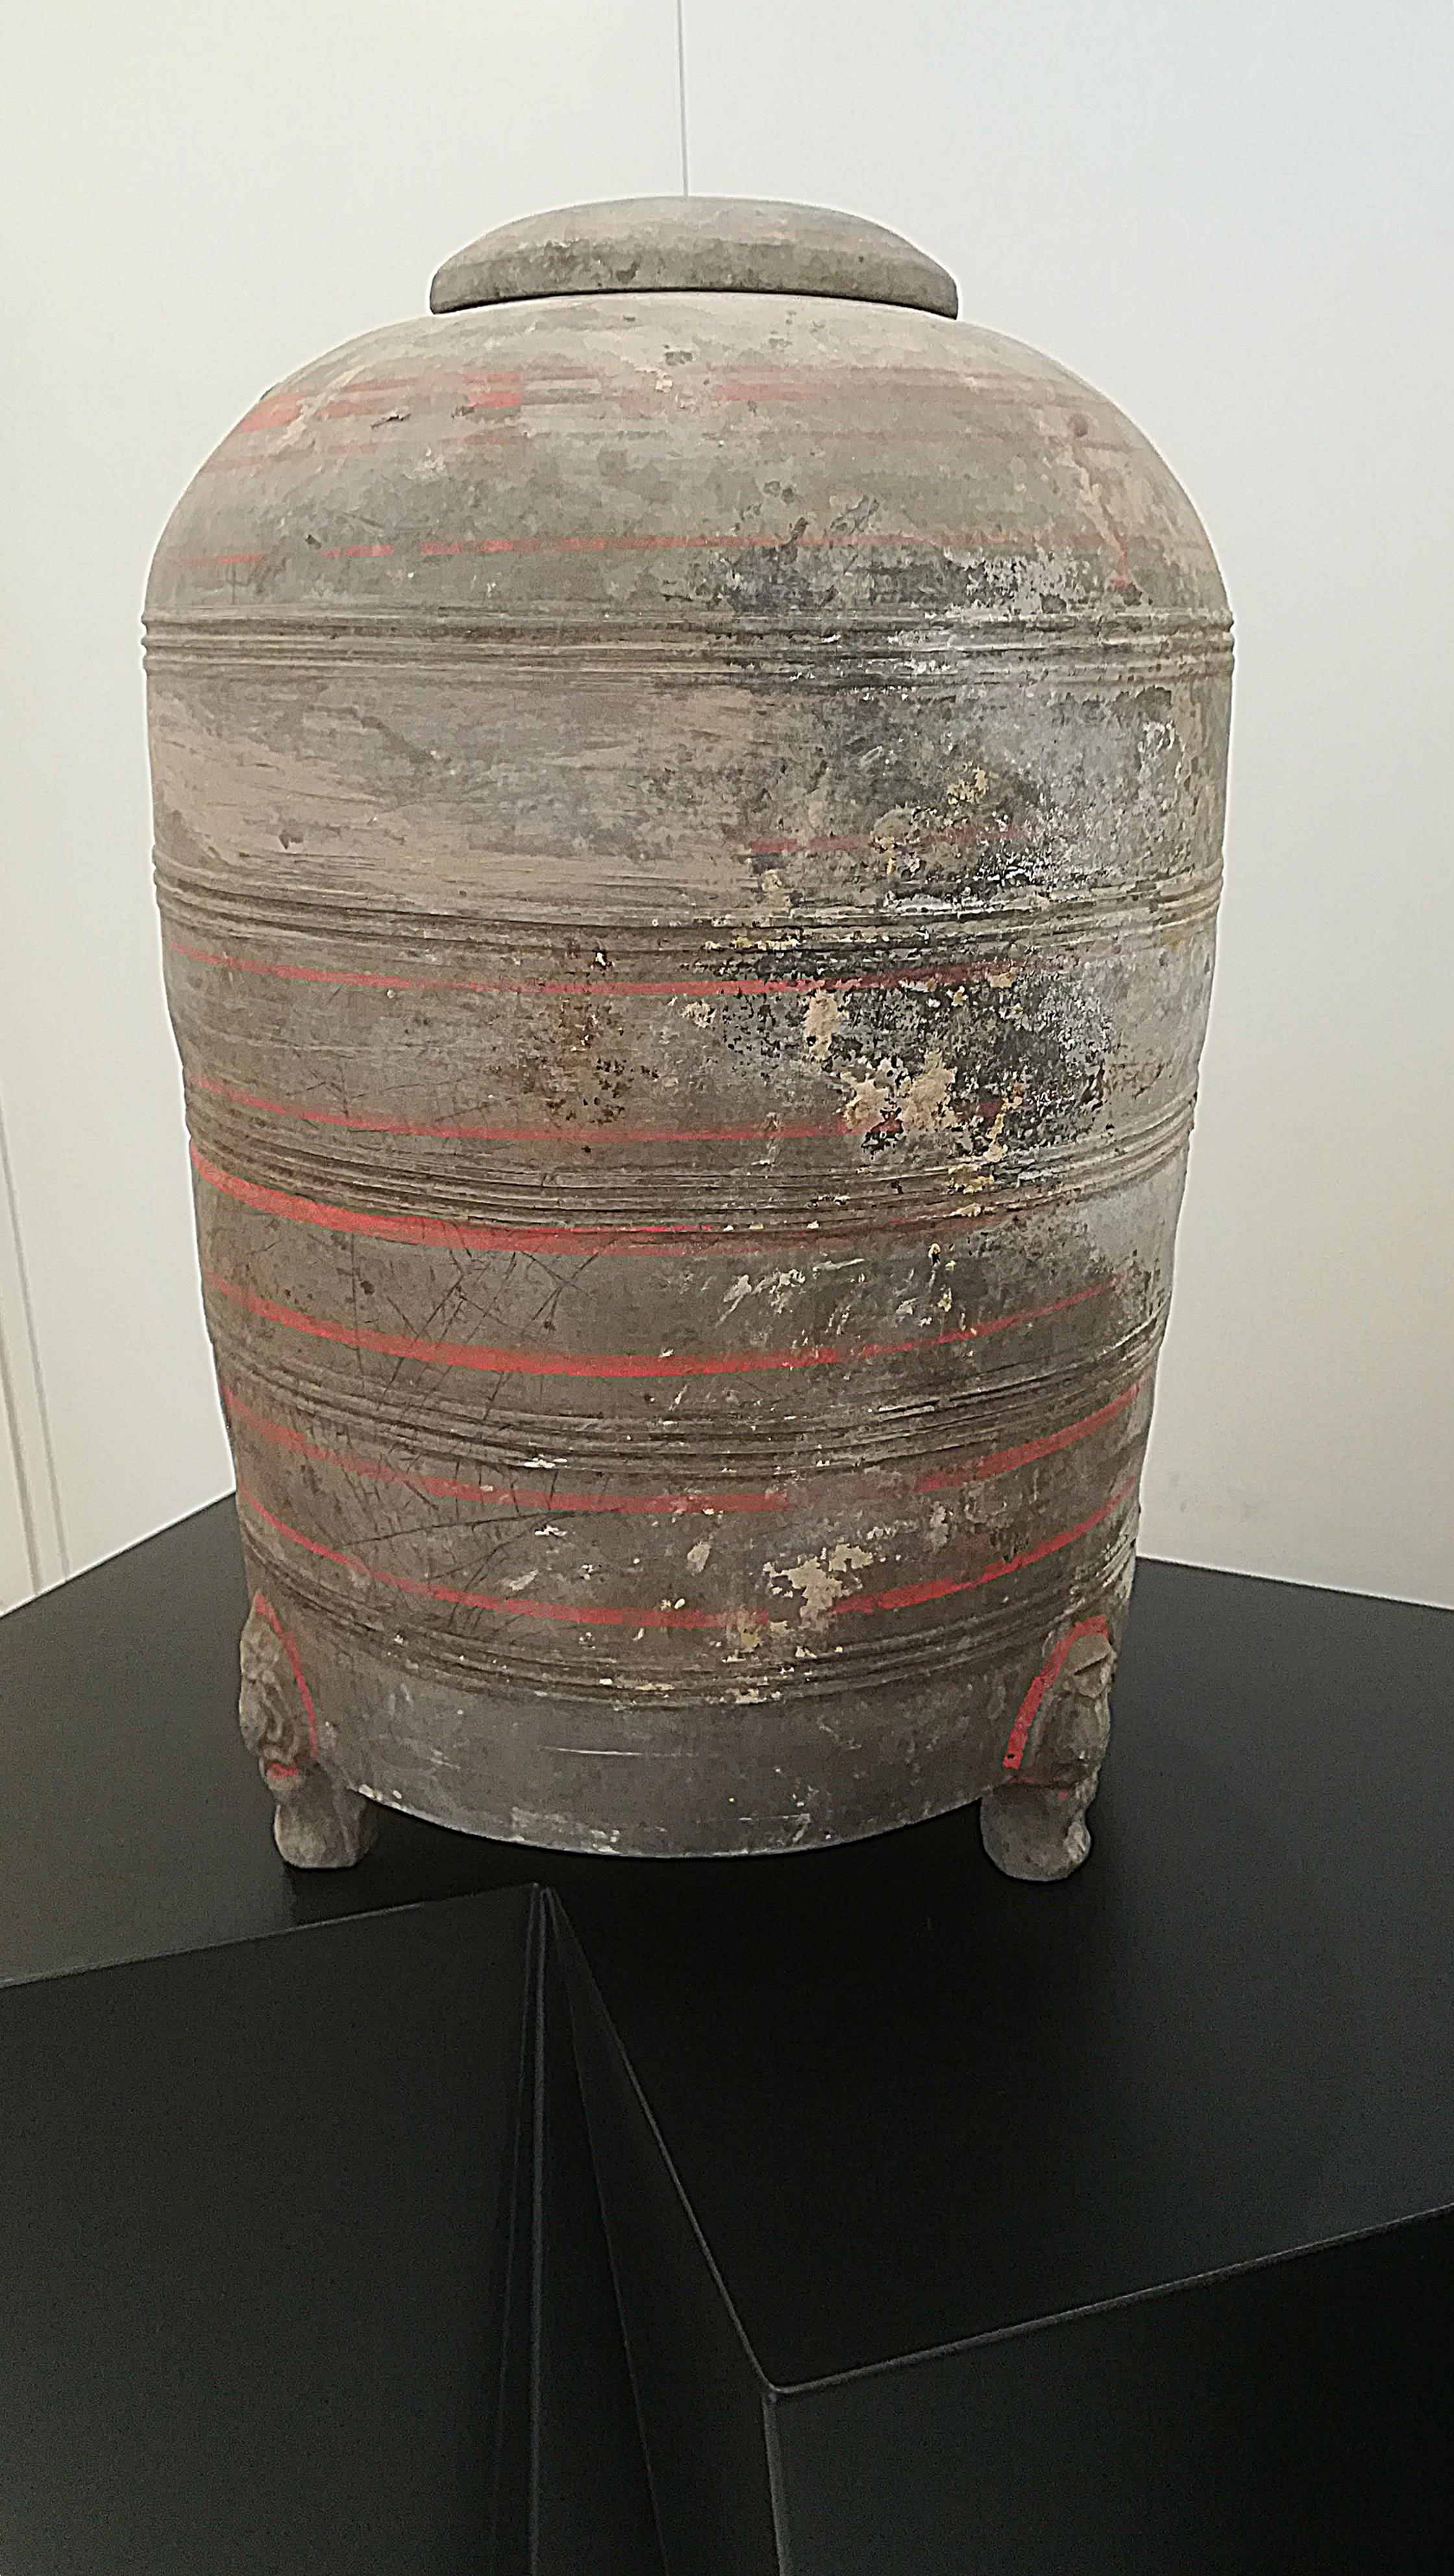 Archaistic Han Dynasty '202 BCE-220 CE' Chinese Covered Pot